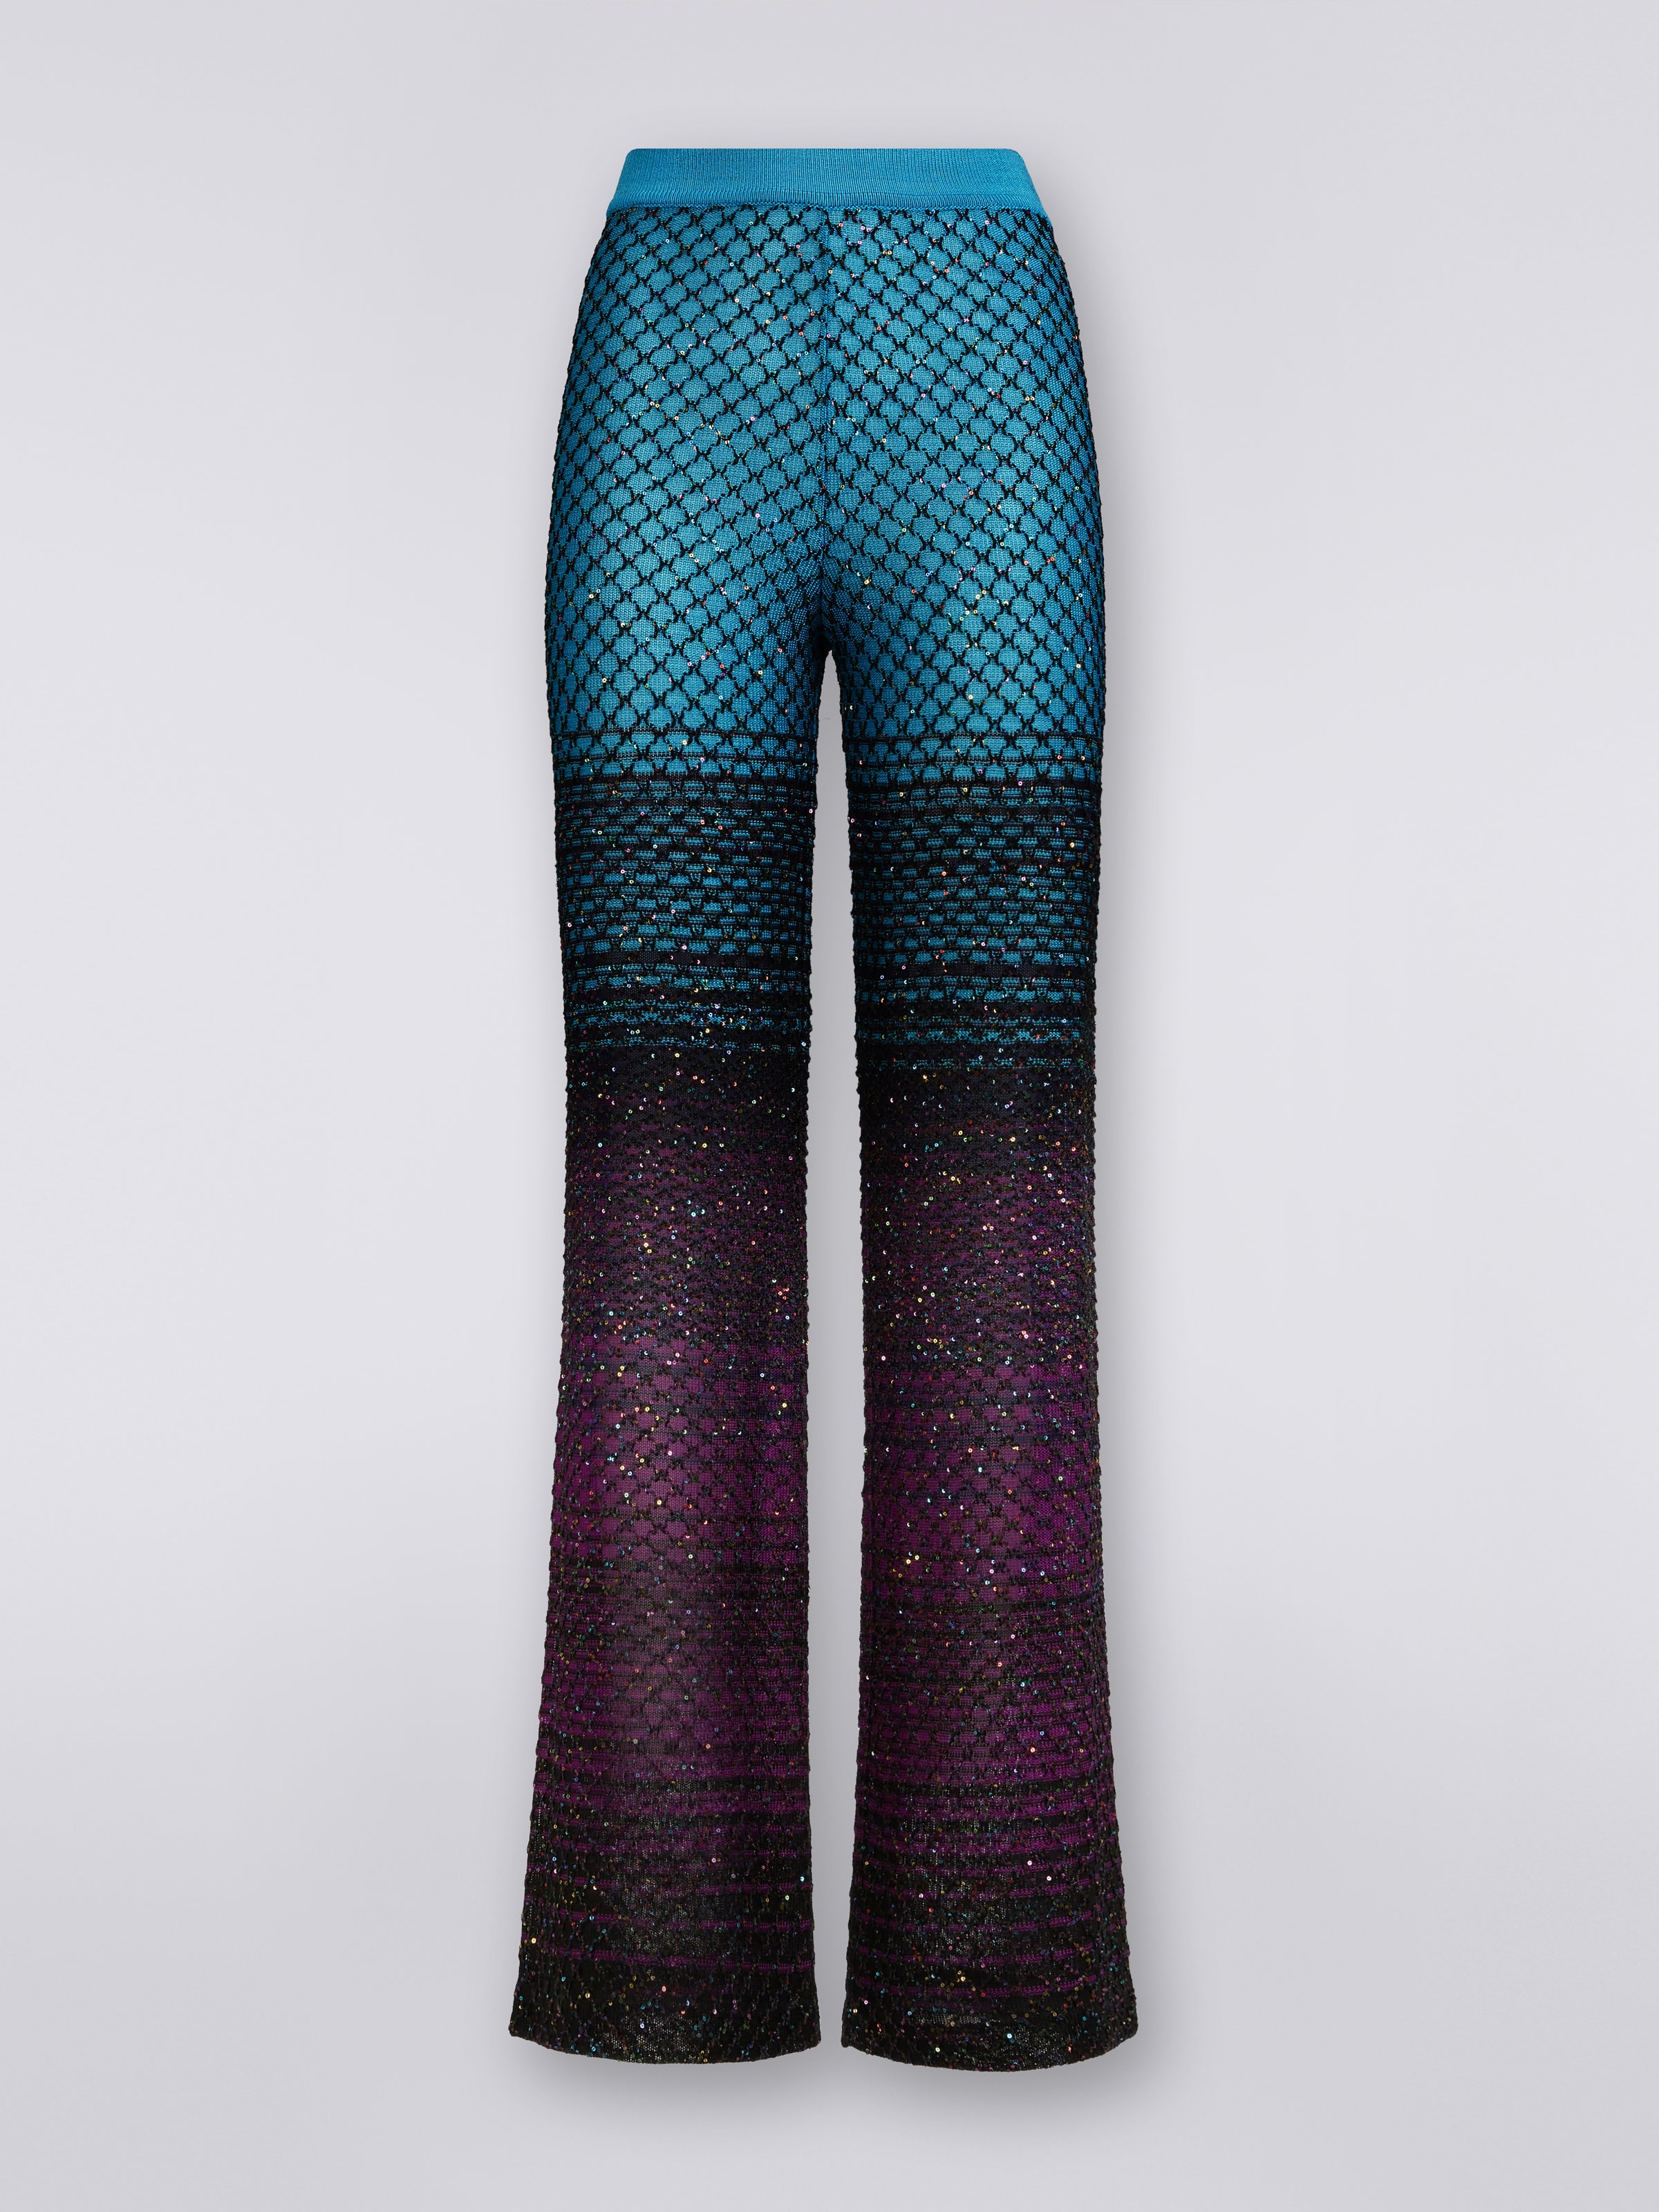 Flared knit trousers with sequins, Turquoise, Purple & Black - 0